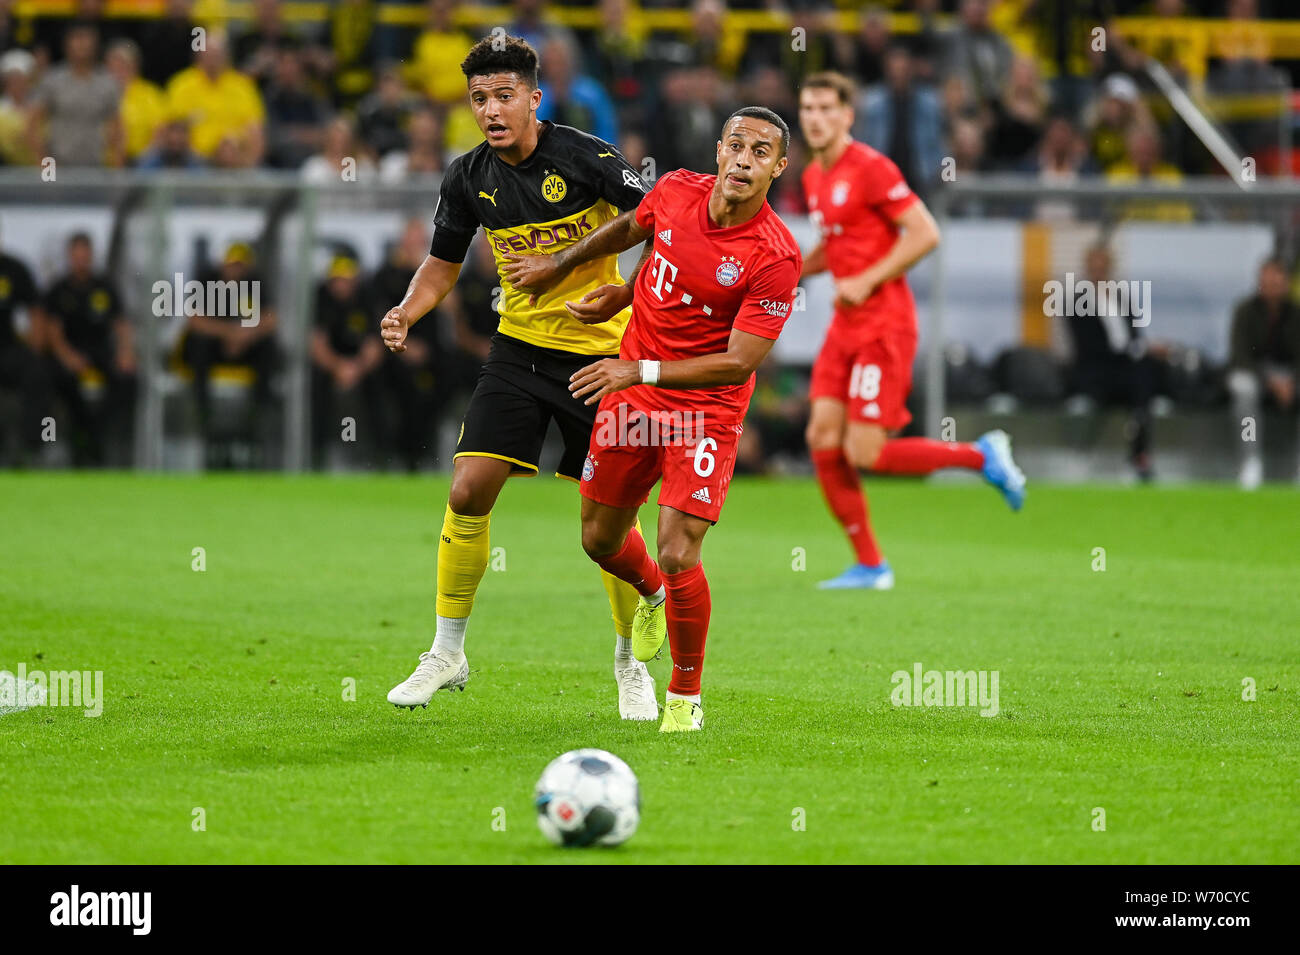 Jadon Sancho from Borussia Dortmund (L) and Thiago from Bayern Munich (R) are seen in action during the Germany Supercup Final 2019 match between Borussia Dortmund and Bayern Munich.(Final score: Borussia Dortmund 2:0 Bayern Munich) Stock Photo